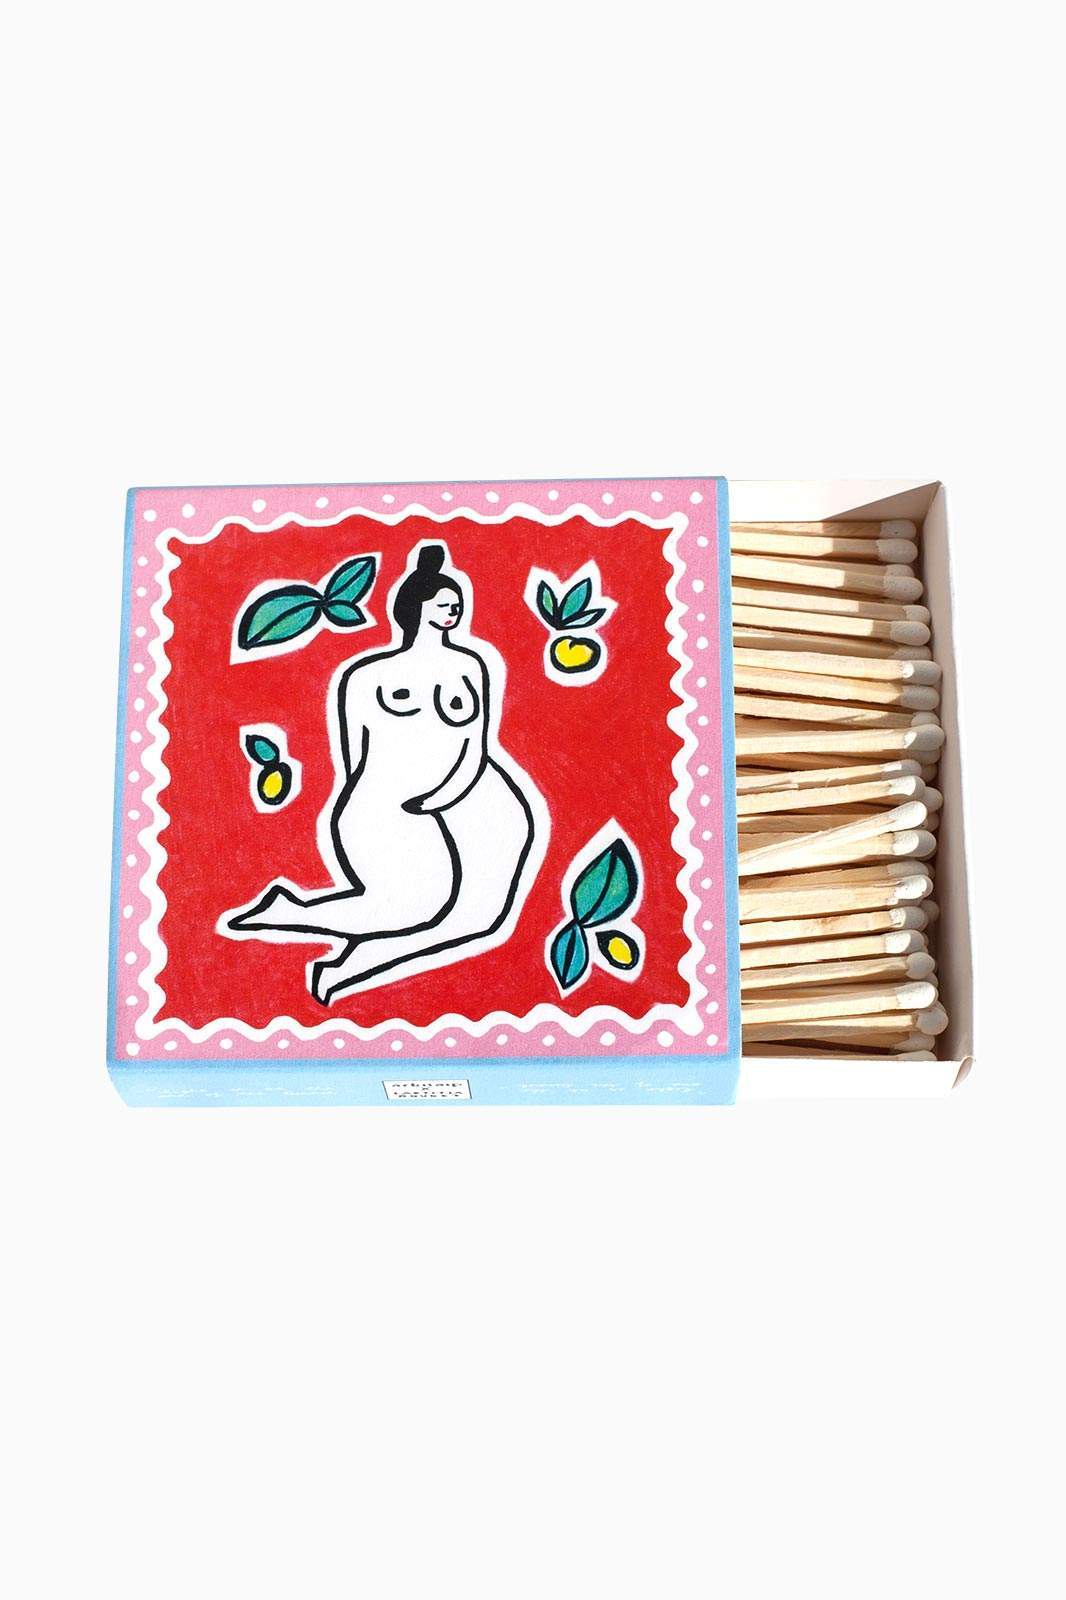 arkitaip Homeware Green/Red arkitaip x Laetitia Rouget Set of Matches